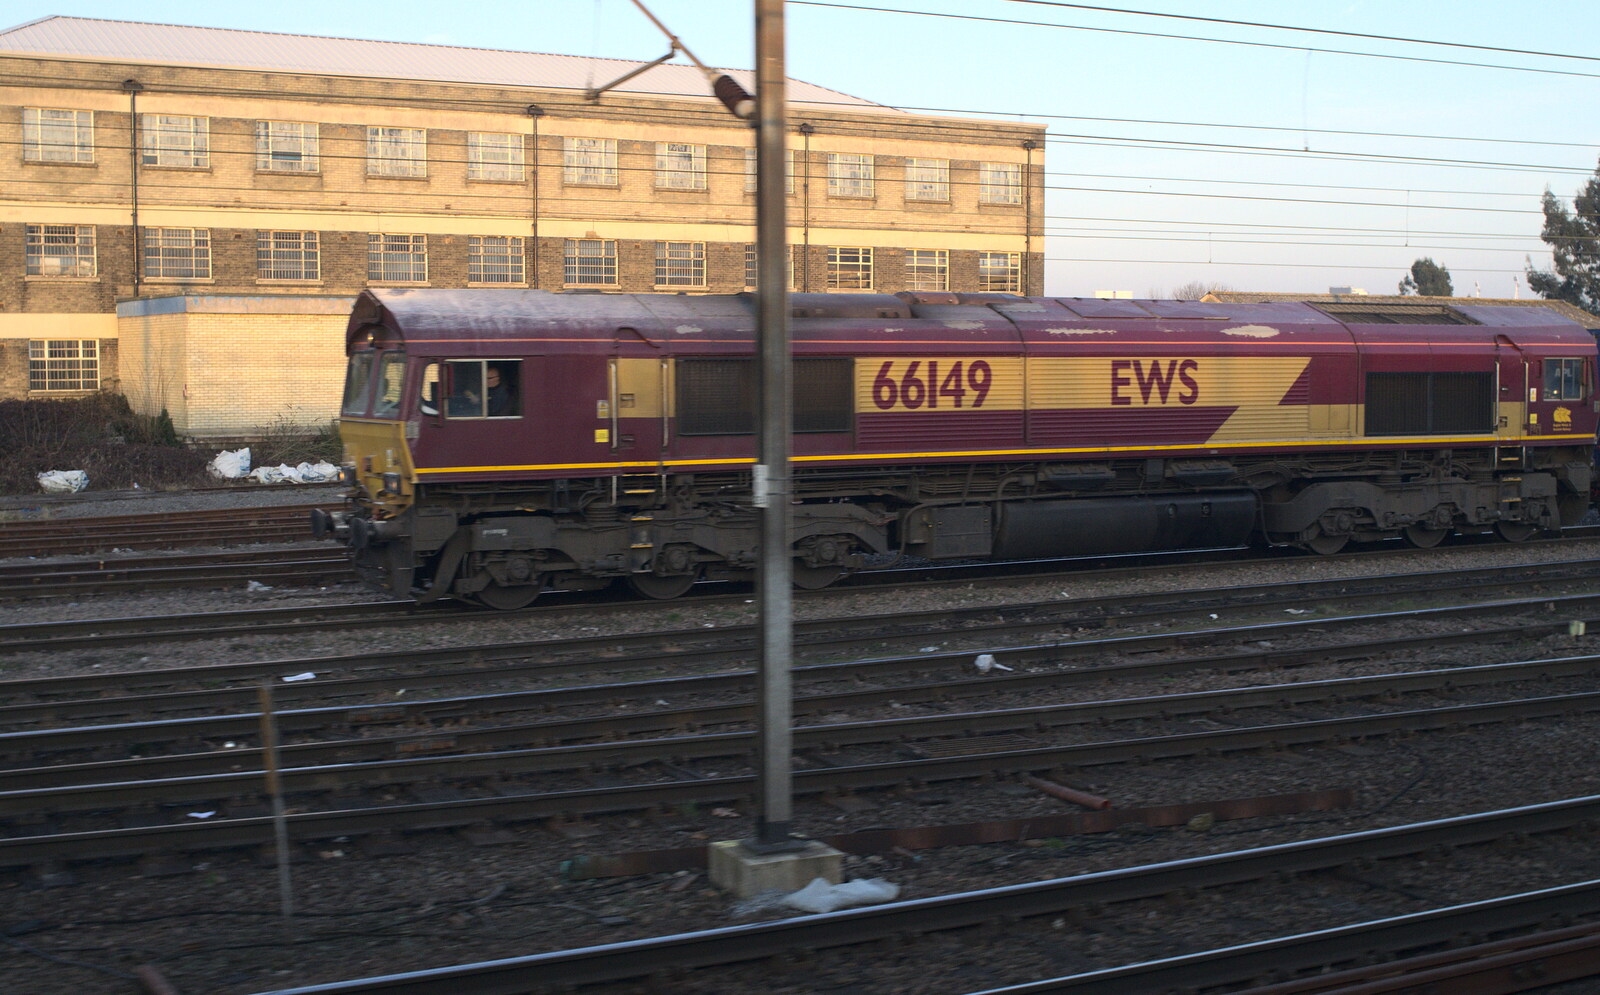 An EWS Class 66, 66149 at Ipswich Goods Junction from Demolition of the Bacon Factory, and Railway Dereliction, Ipswich and London - 5th March 2013